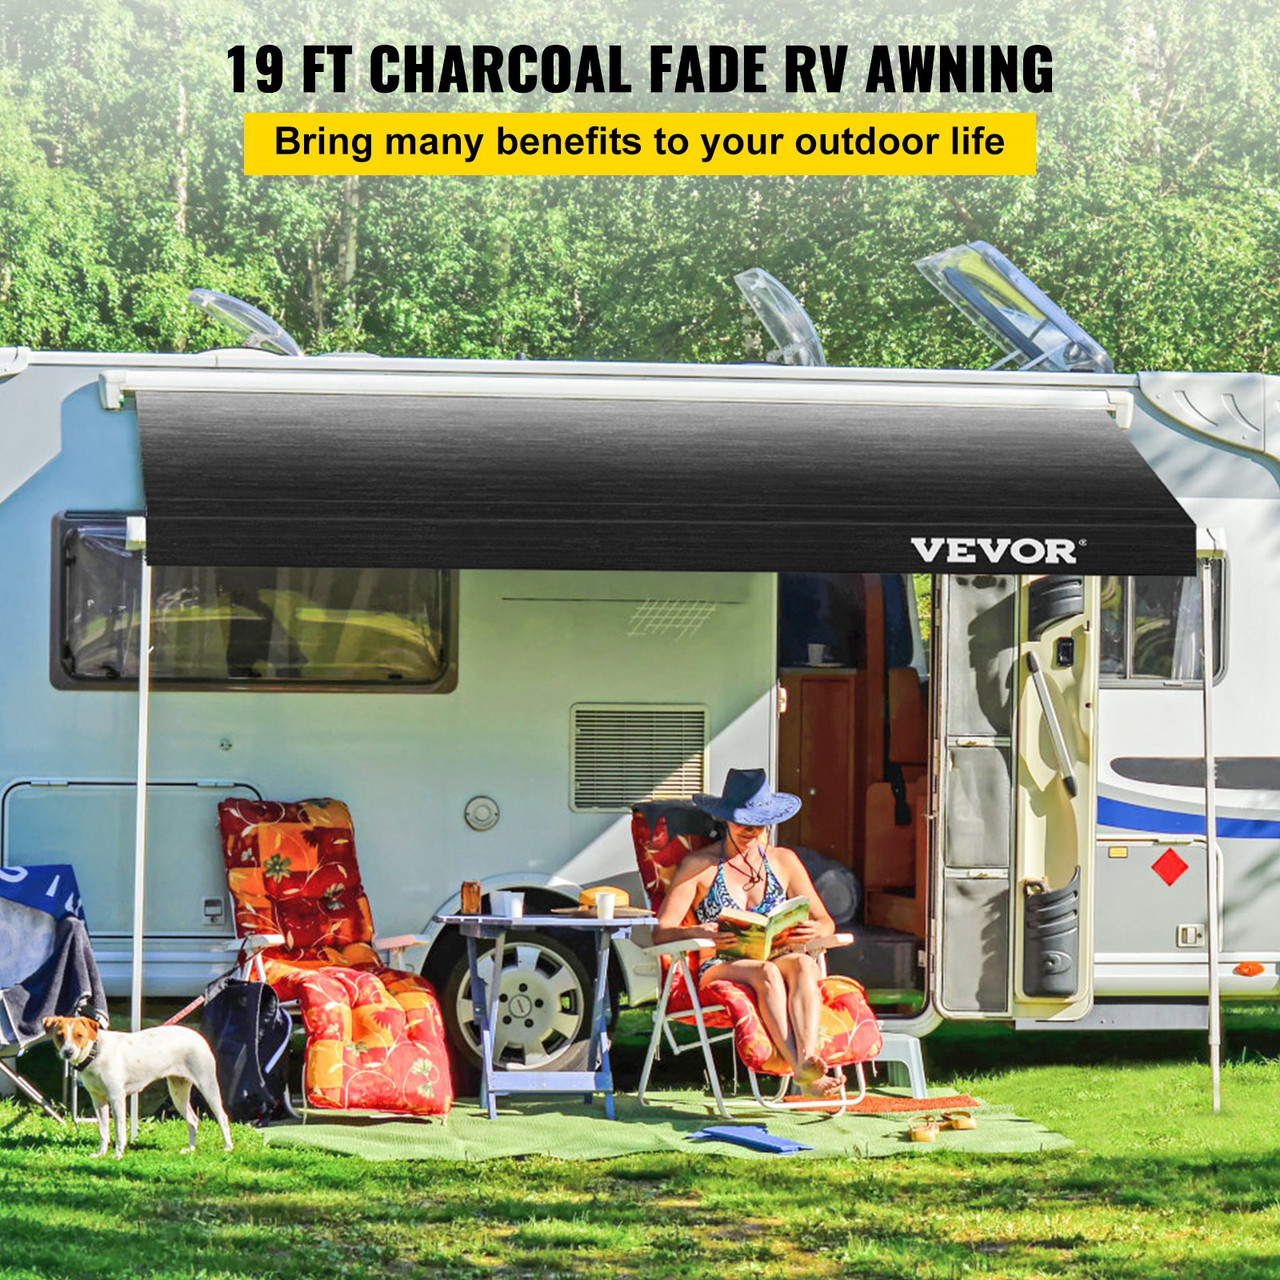 RV Awning 19 ft, Awning Replacement Fabric 18 ft 2 in, Charcoal Fade RV Awning Replacement, 15oz Vinyl Material Replacement Awning, Sun Shade and Waterproof Camper Awning Replacement Fabric